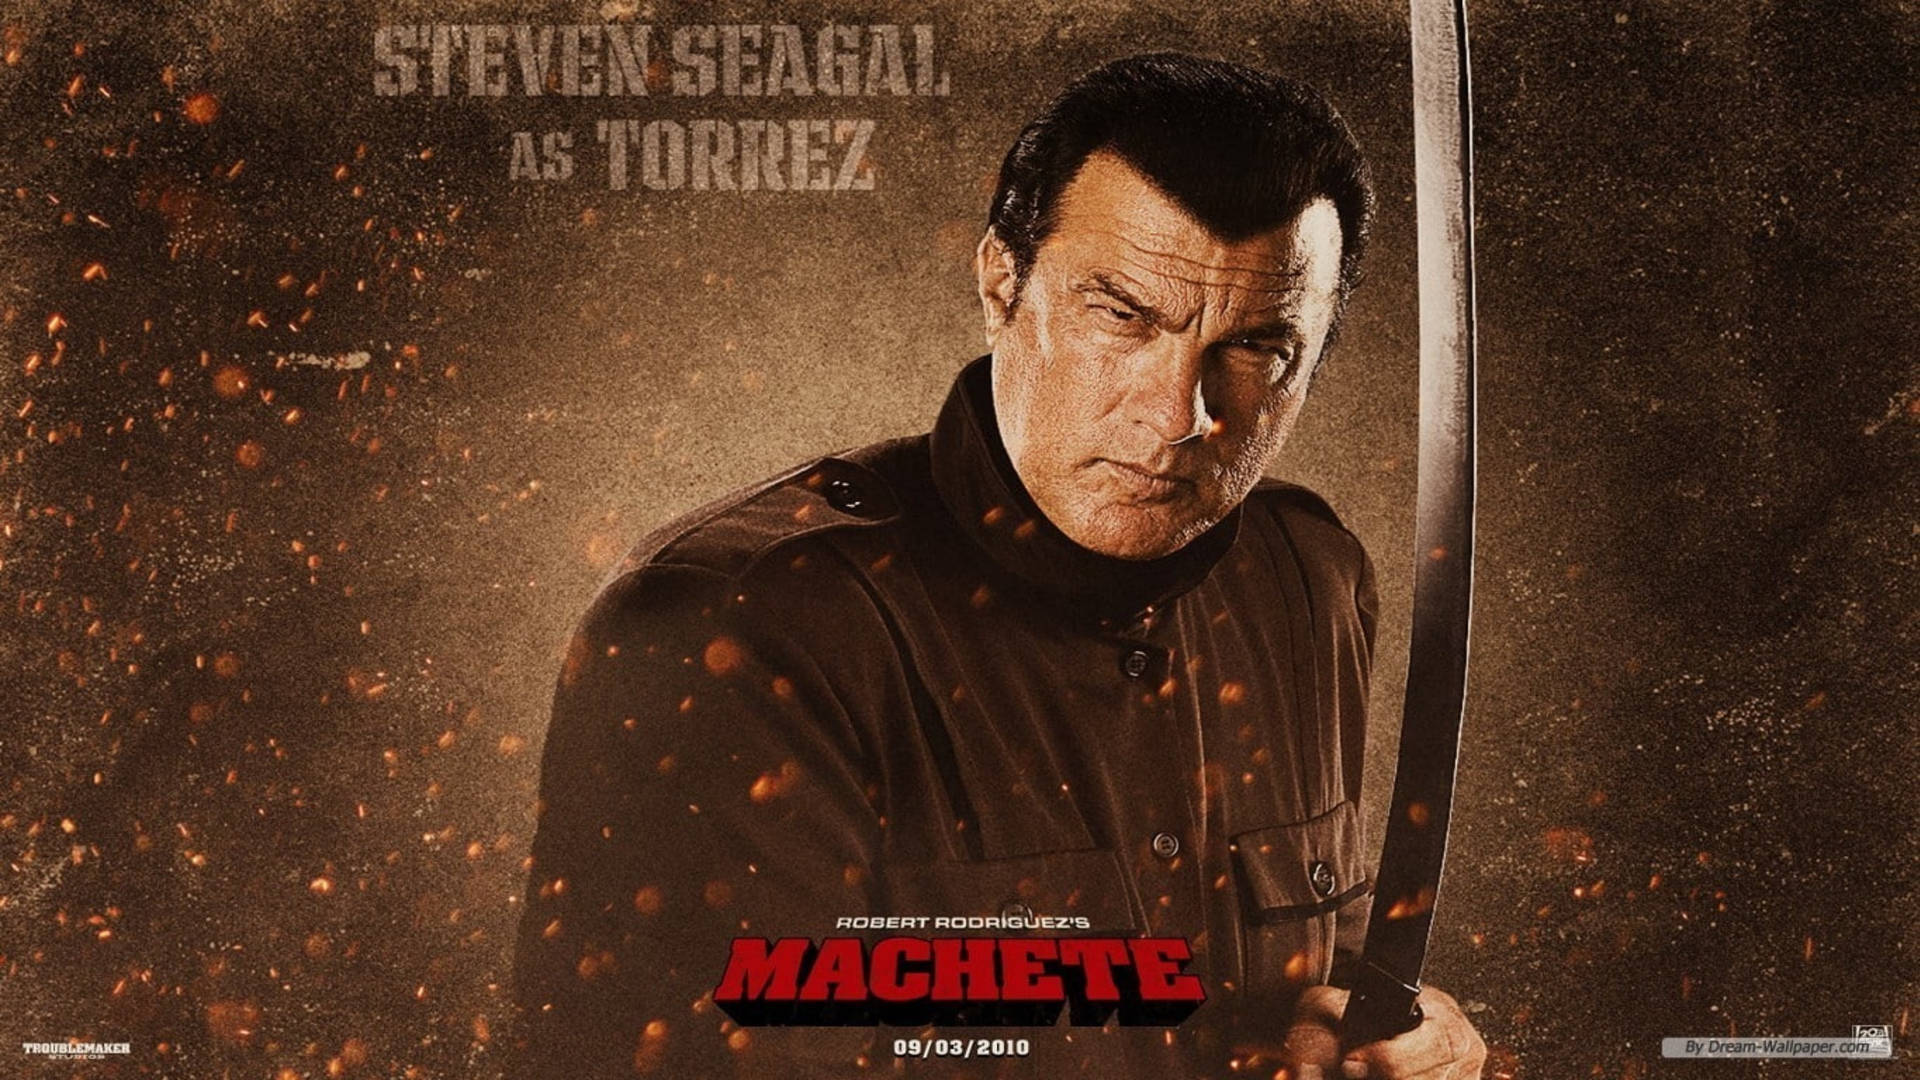 Stevenseagal Machete Is Not A Complete Sentence. To Provide An Accurate Translation, Could You Please Provide A Complete Sentence Or Provide More Context? Wallpaper